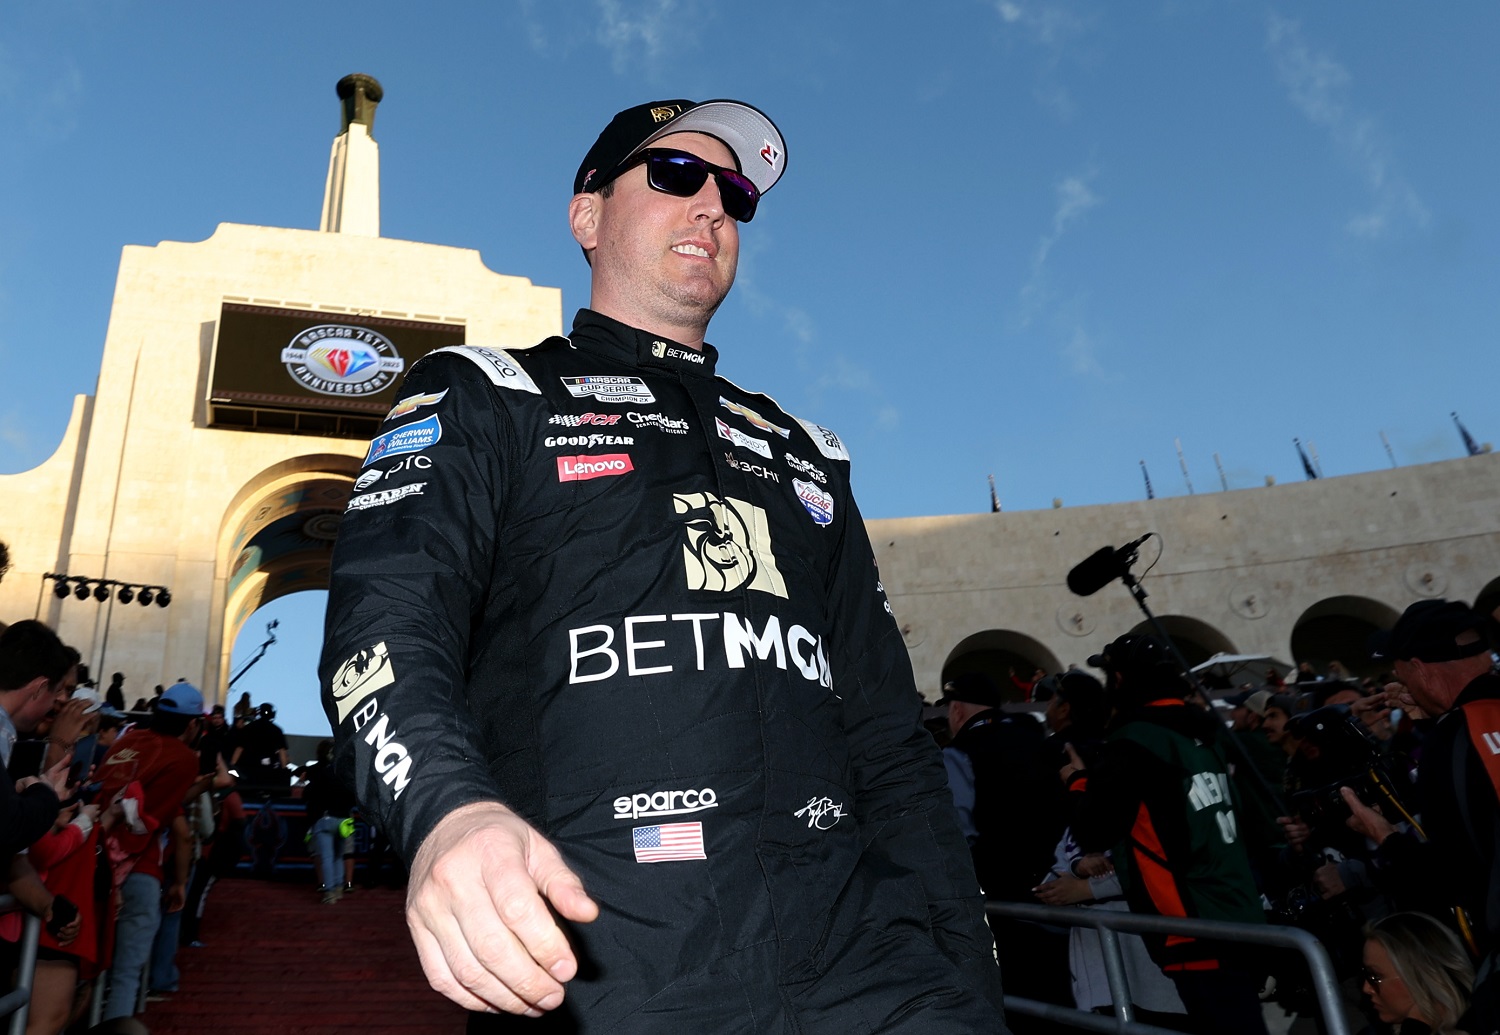 Kyle Busch, driver of the #8 BetMGM Chevrolet, walks down the stairs during driver intros prior to the NASCAR Clash at the Coliseum at Los Angeles Memorial Coliseum on Feb. 5, 2023.